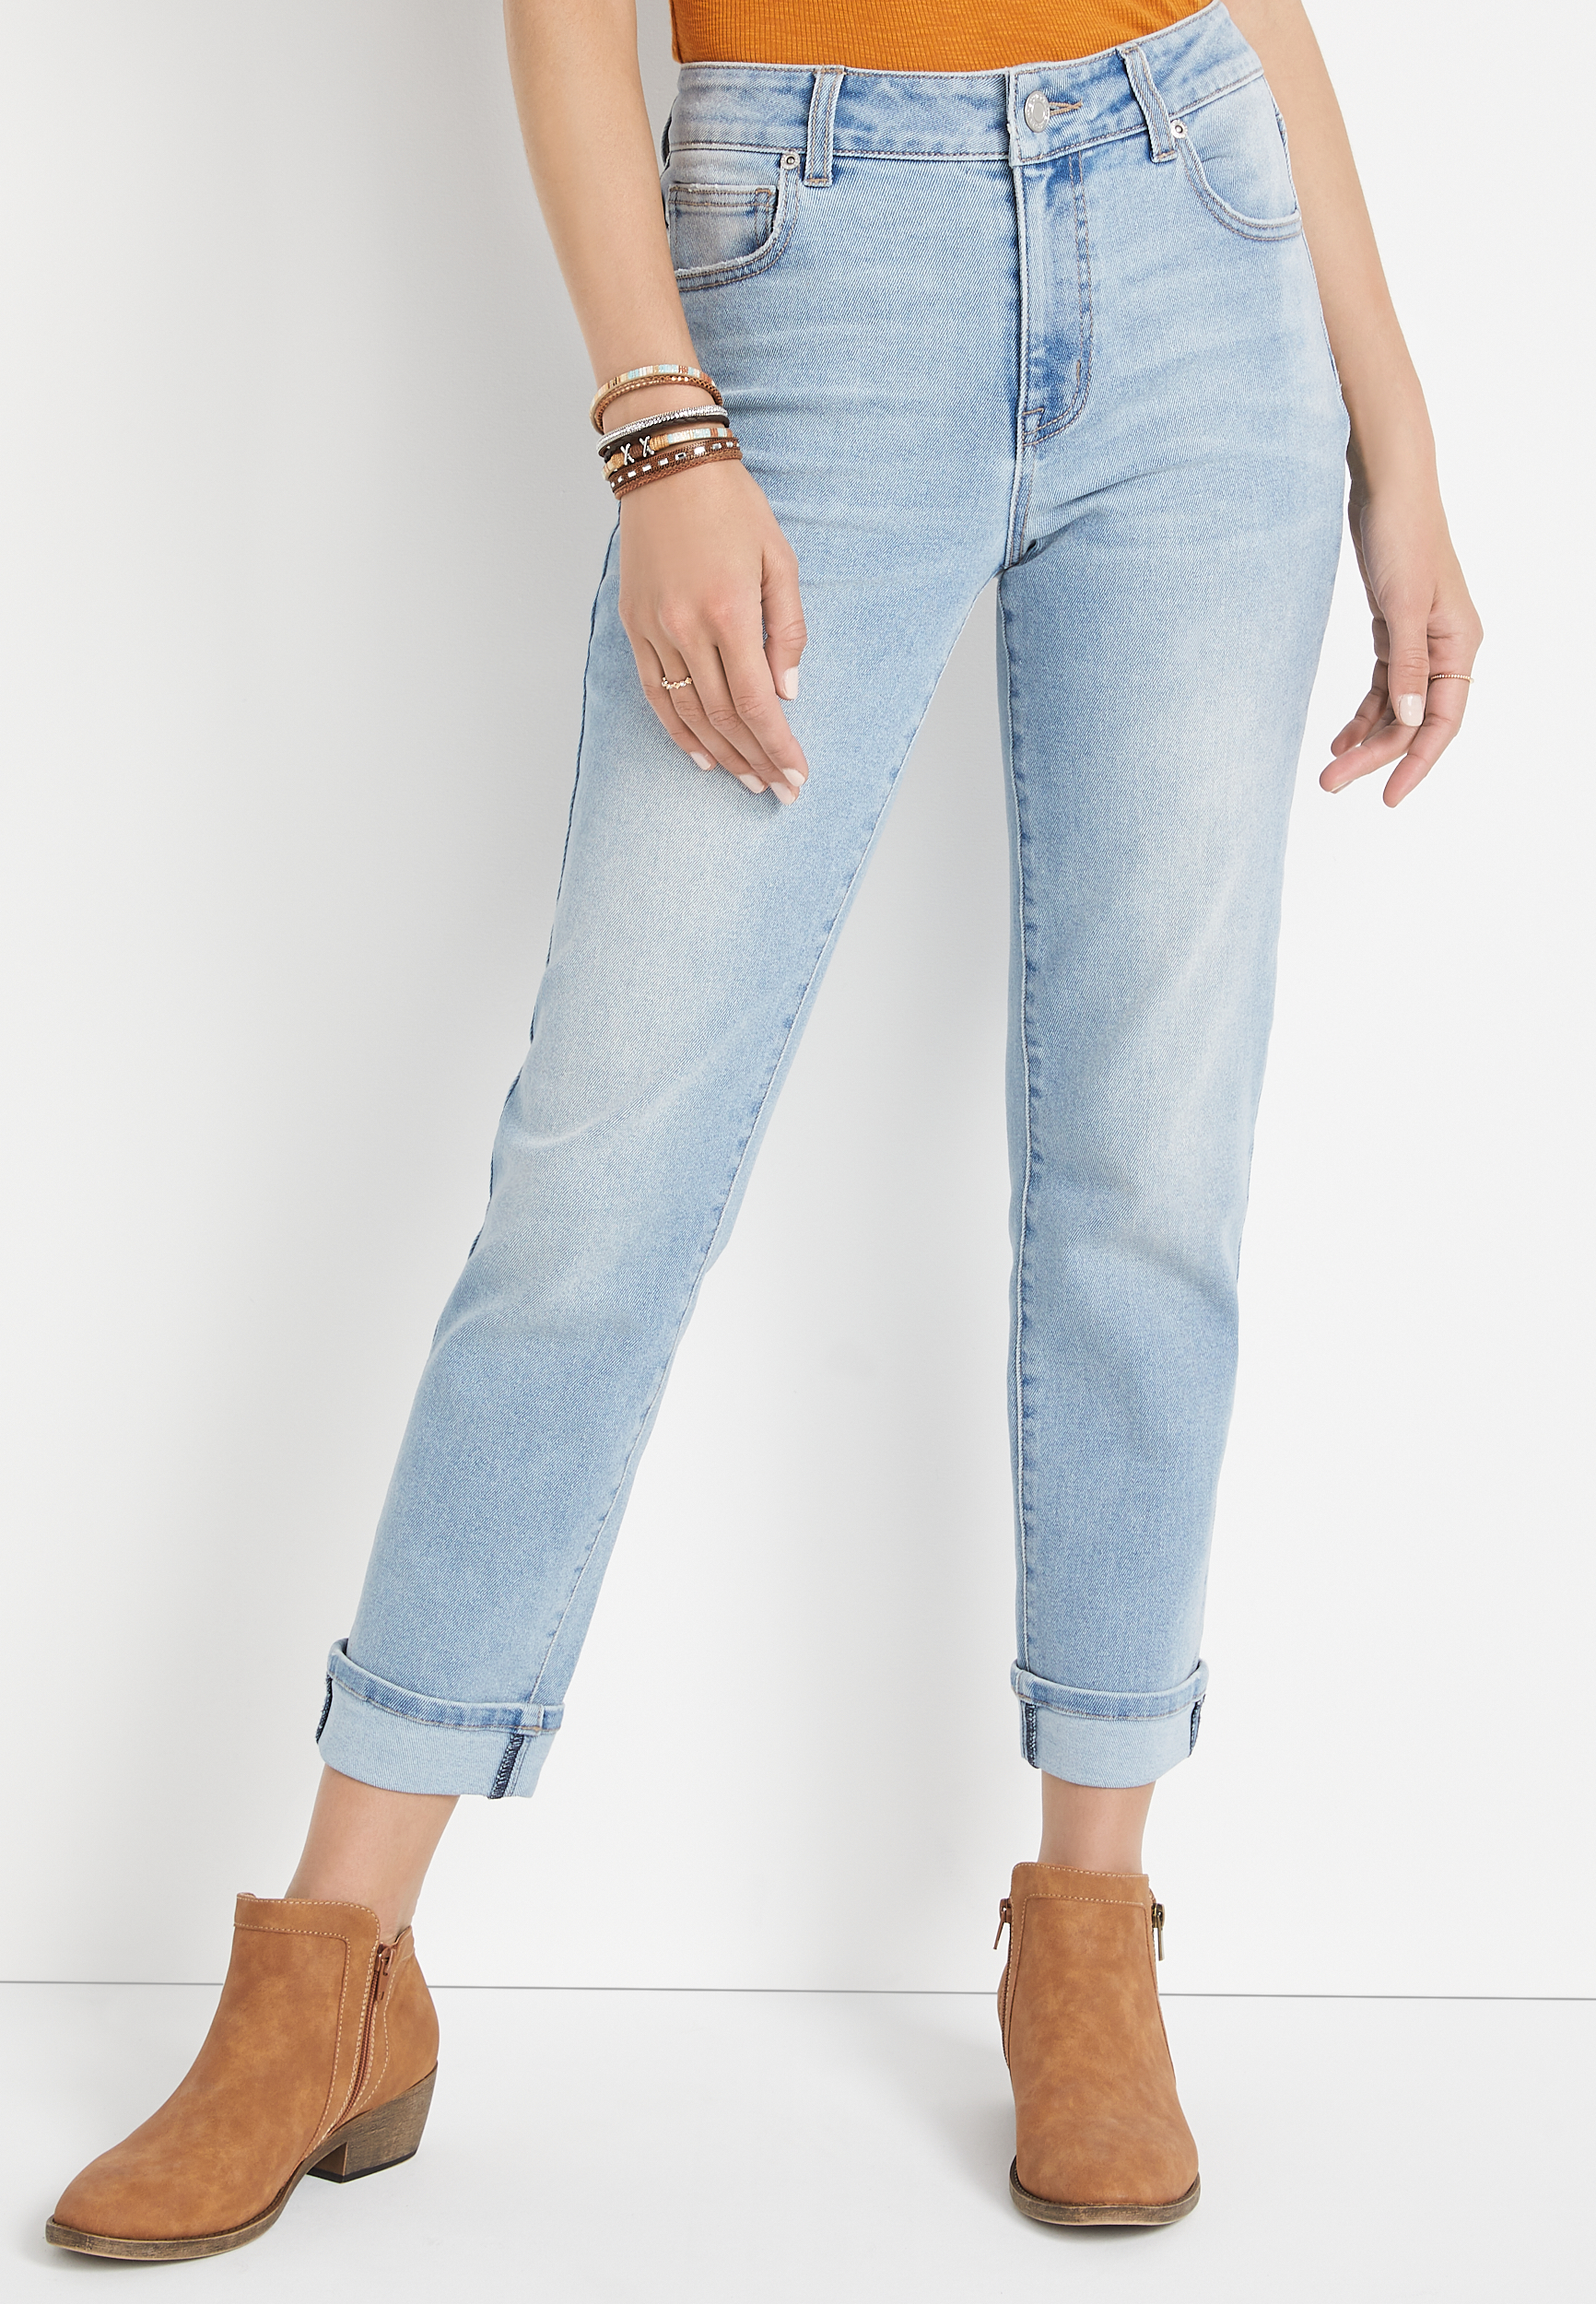 m jeans by maurices™ Vintage Slim Straight High Rise Jean | maurices